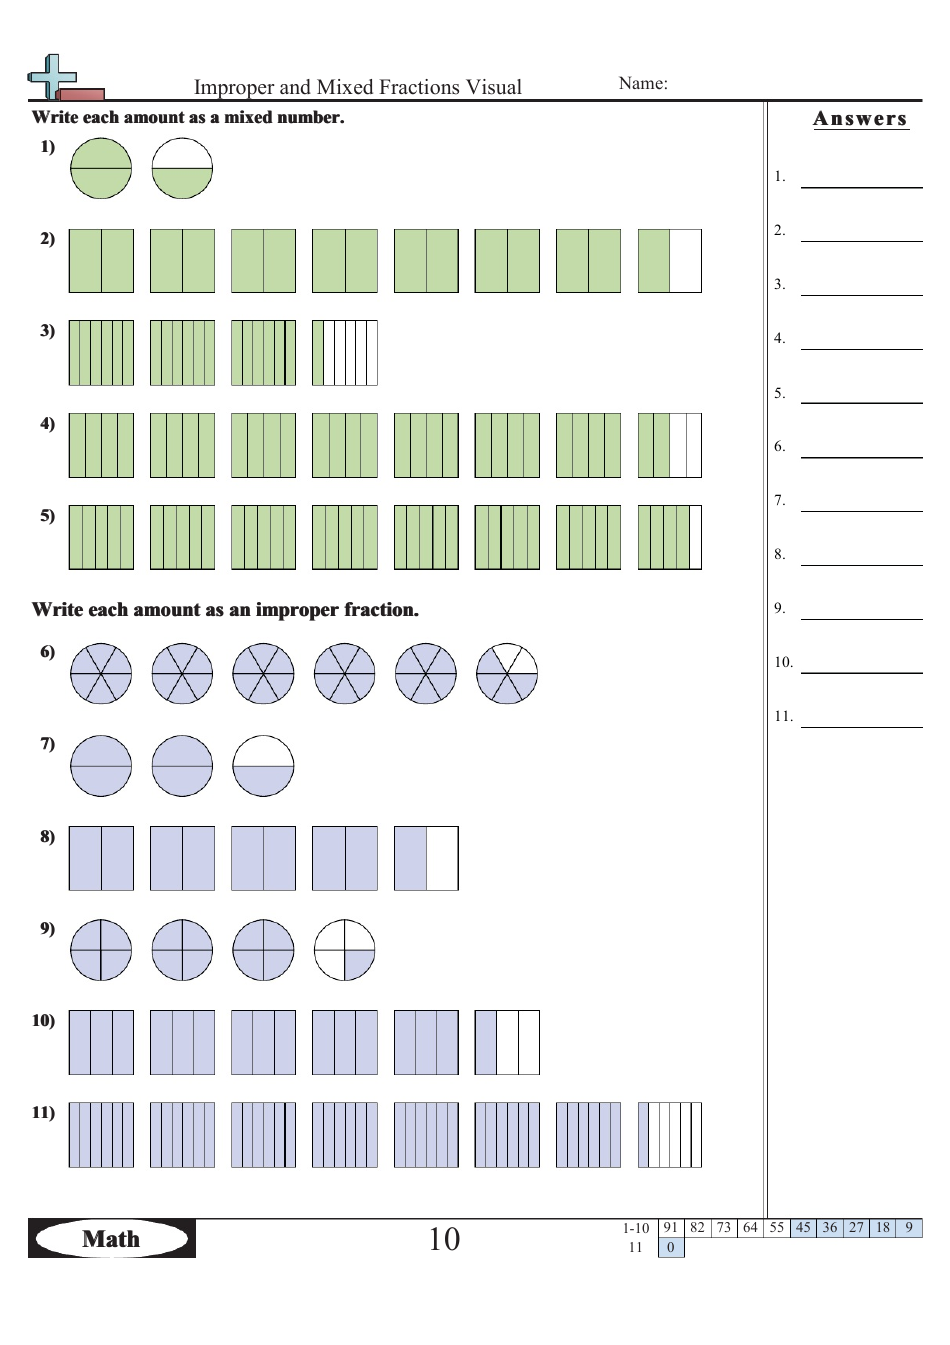 Visual worksheet showcasing improper and mixed fractions with answers